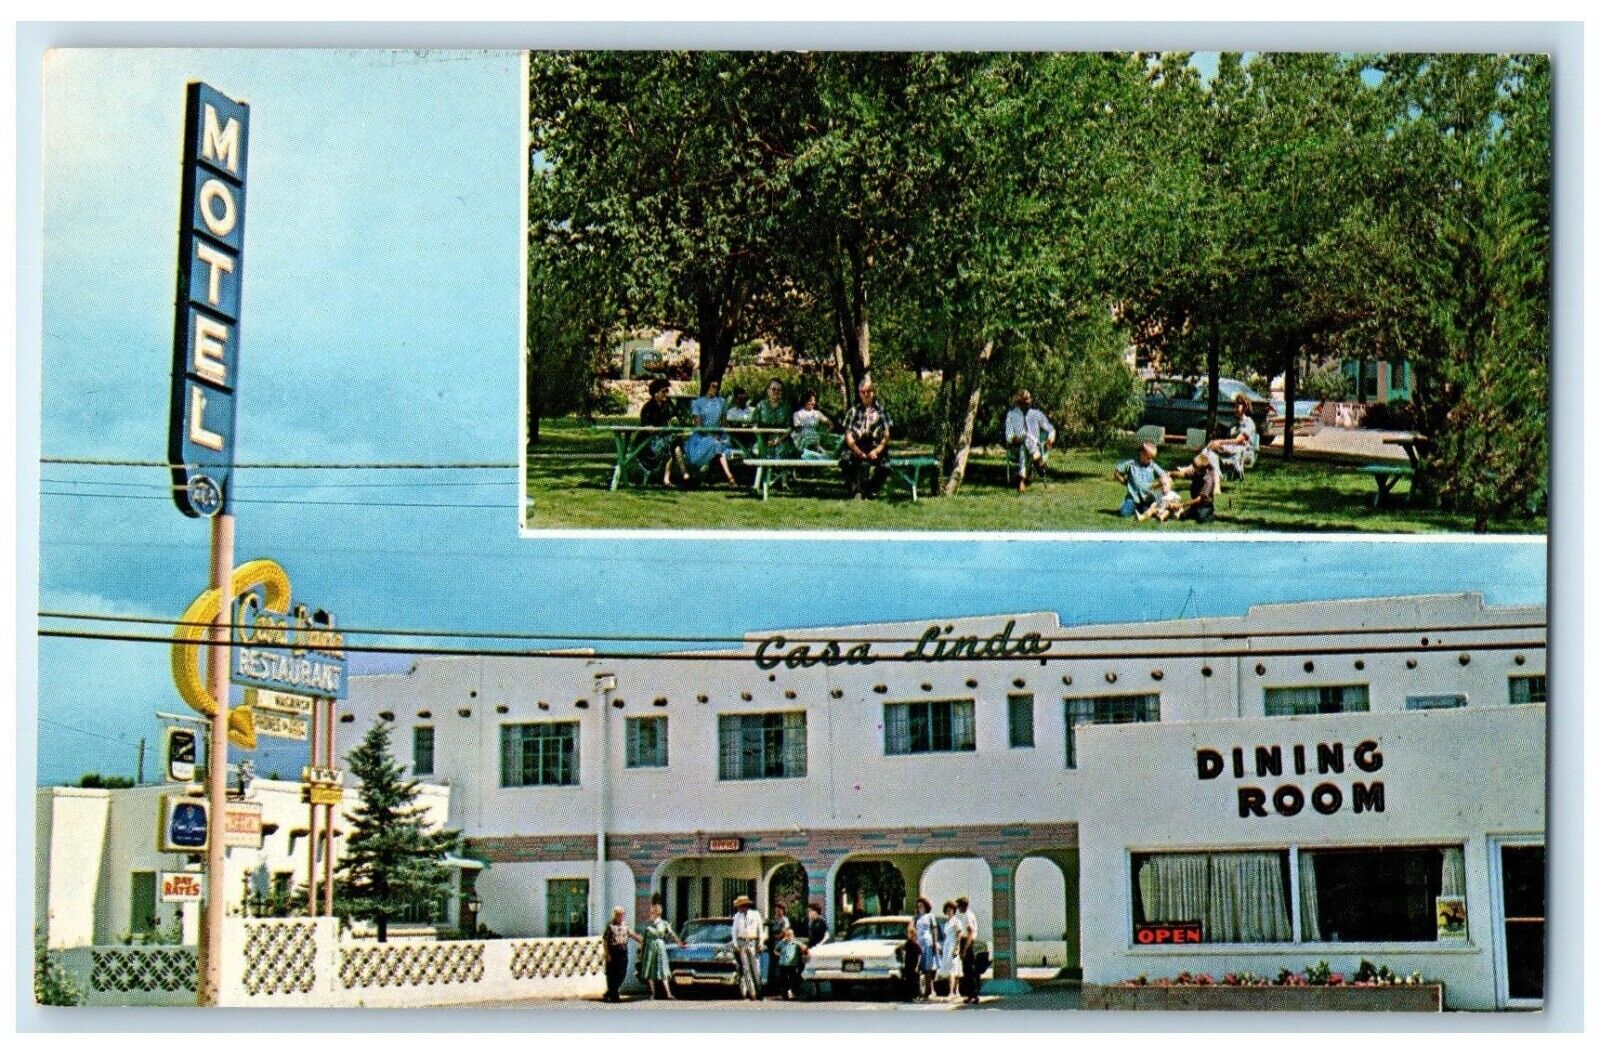 New Casa Linda Motel And Restaurant Dining Room Gallup New Mexico NM Postcard